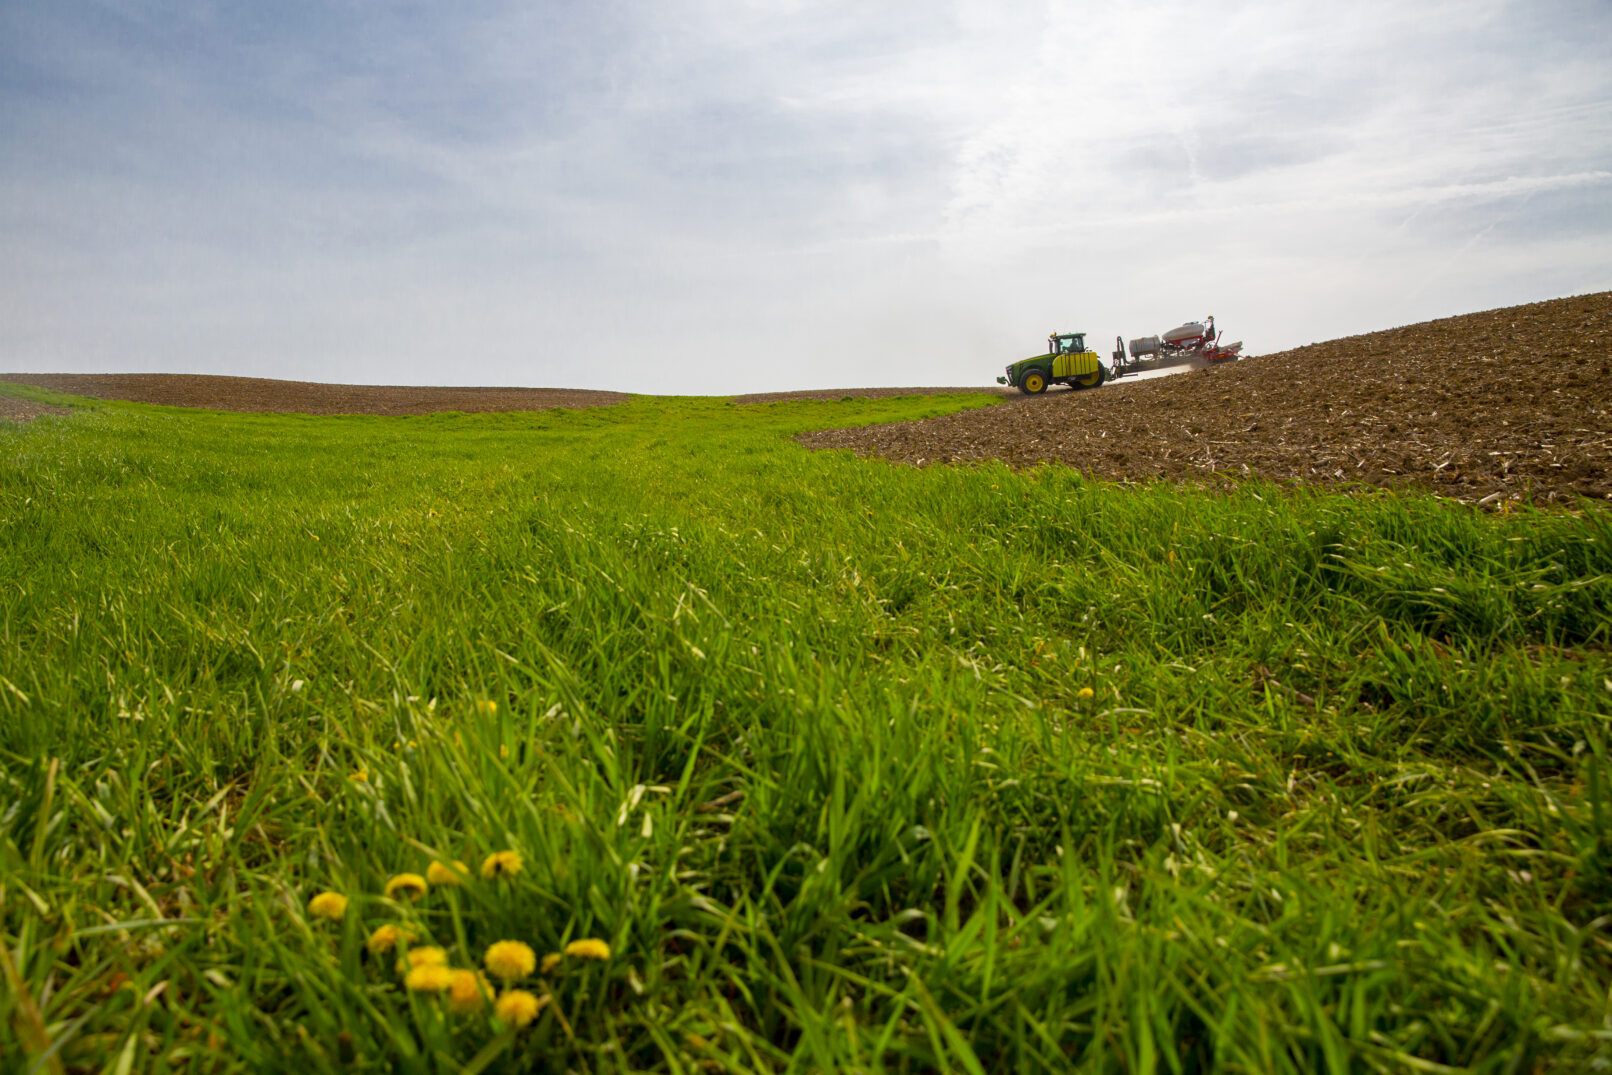 A farmer plows dirt while driving a tractor next to a green field of grass.